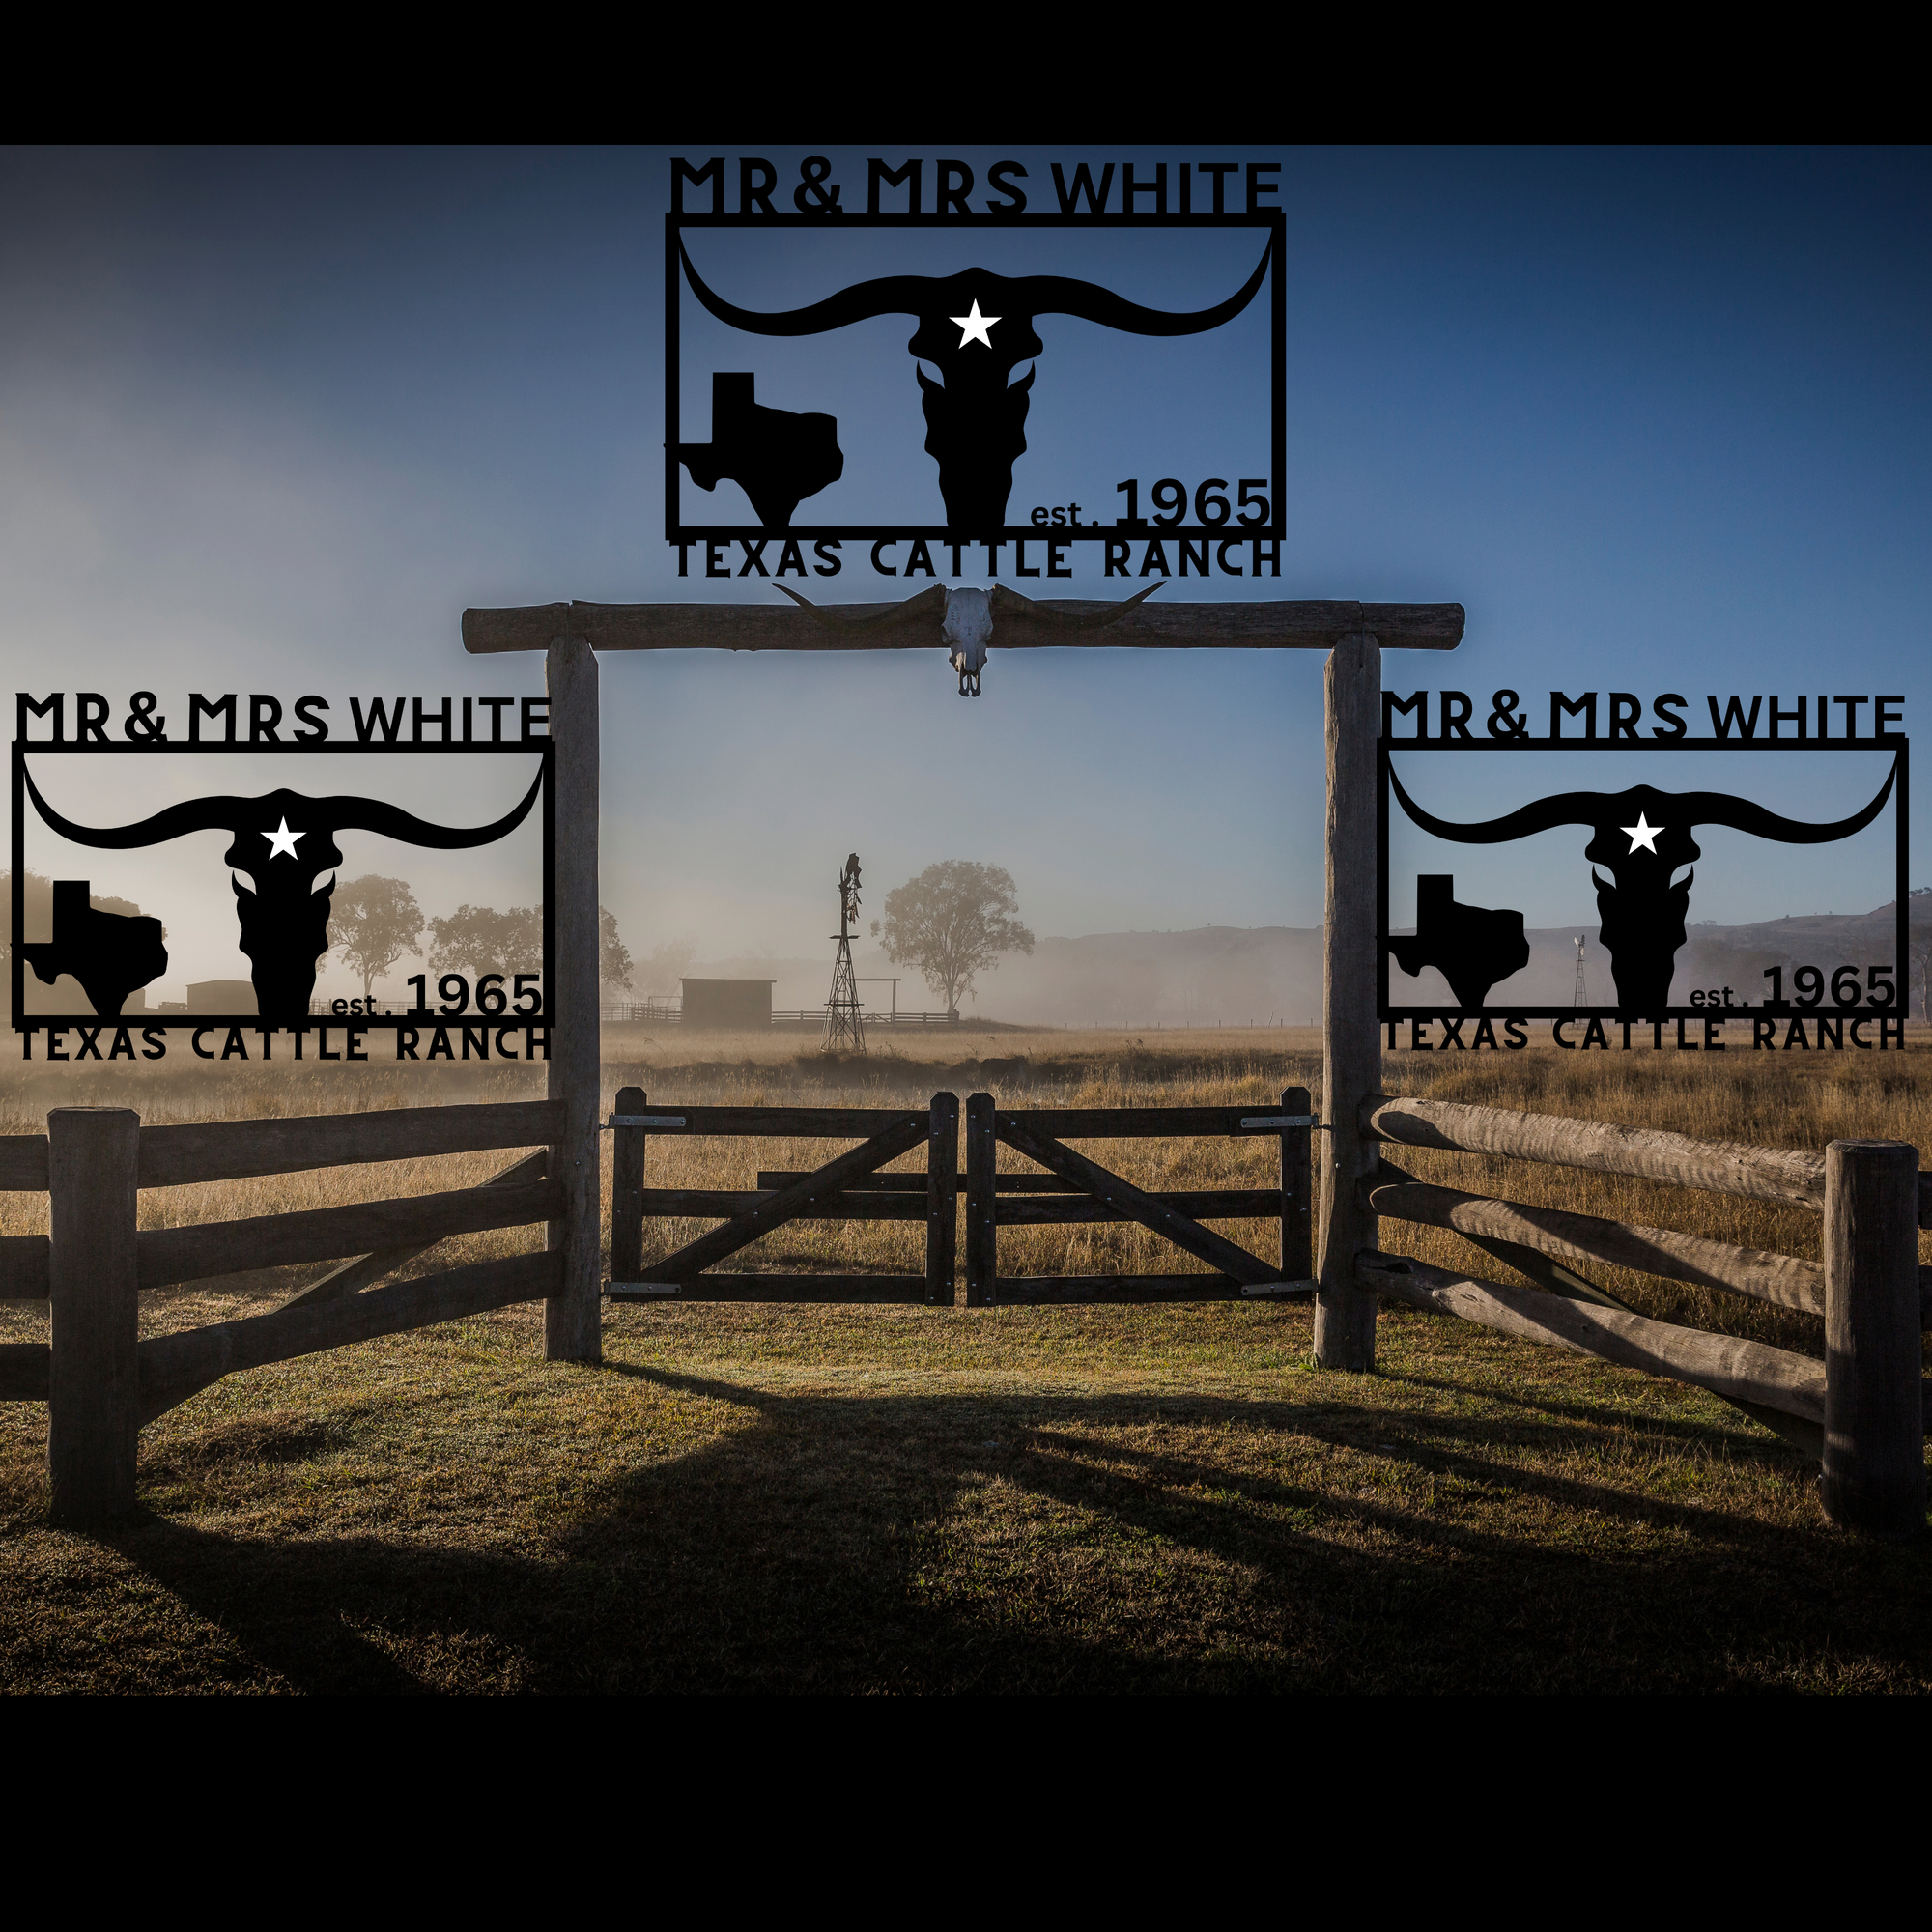 Farmers' and Ranchers' personalized Metal Art